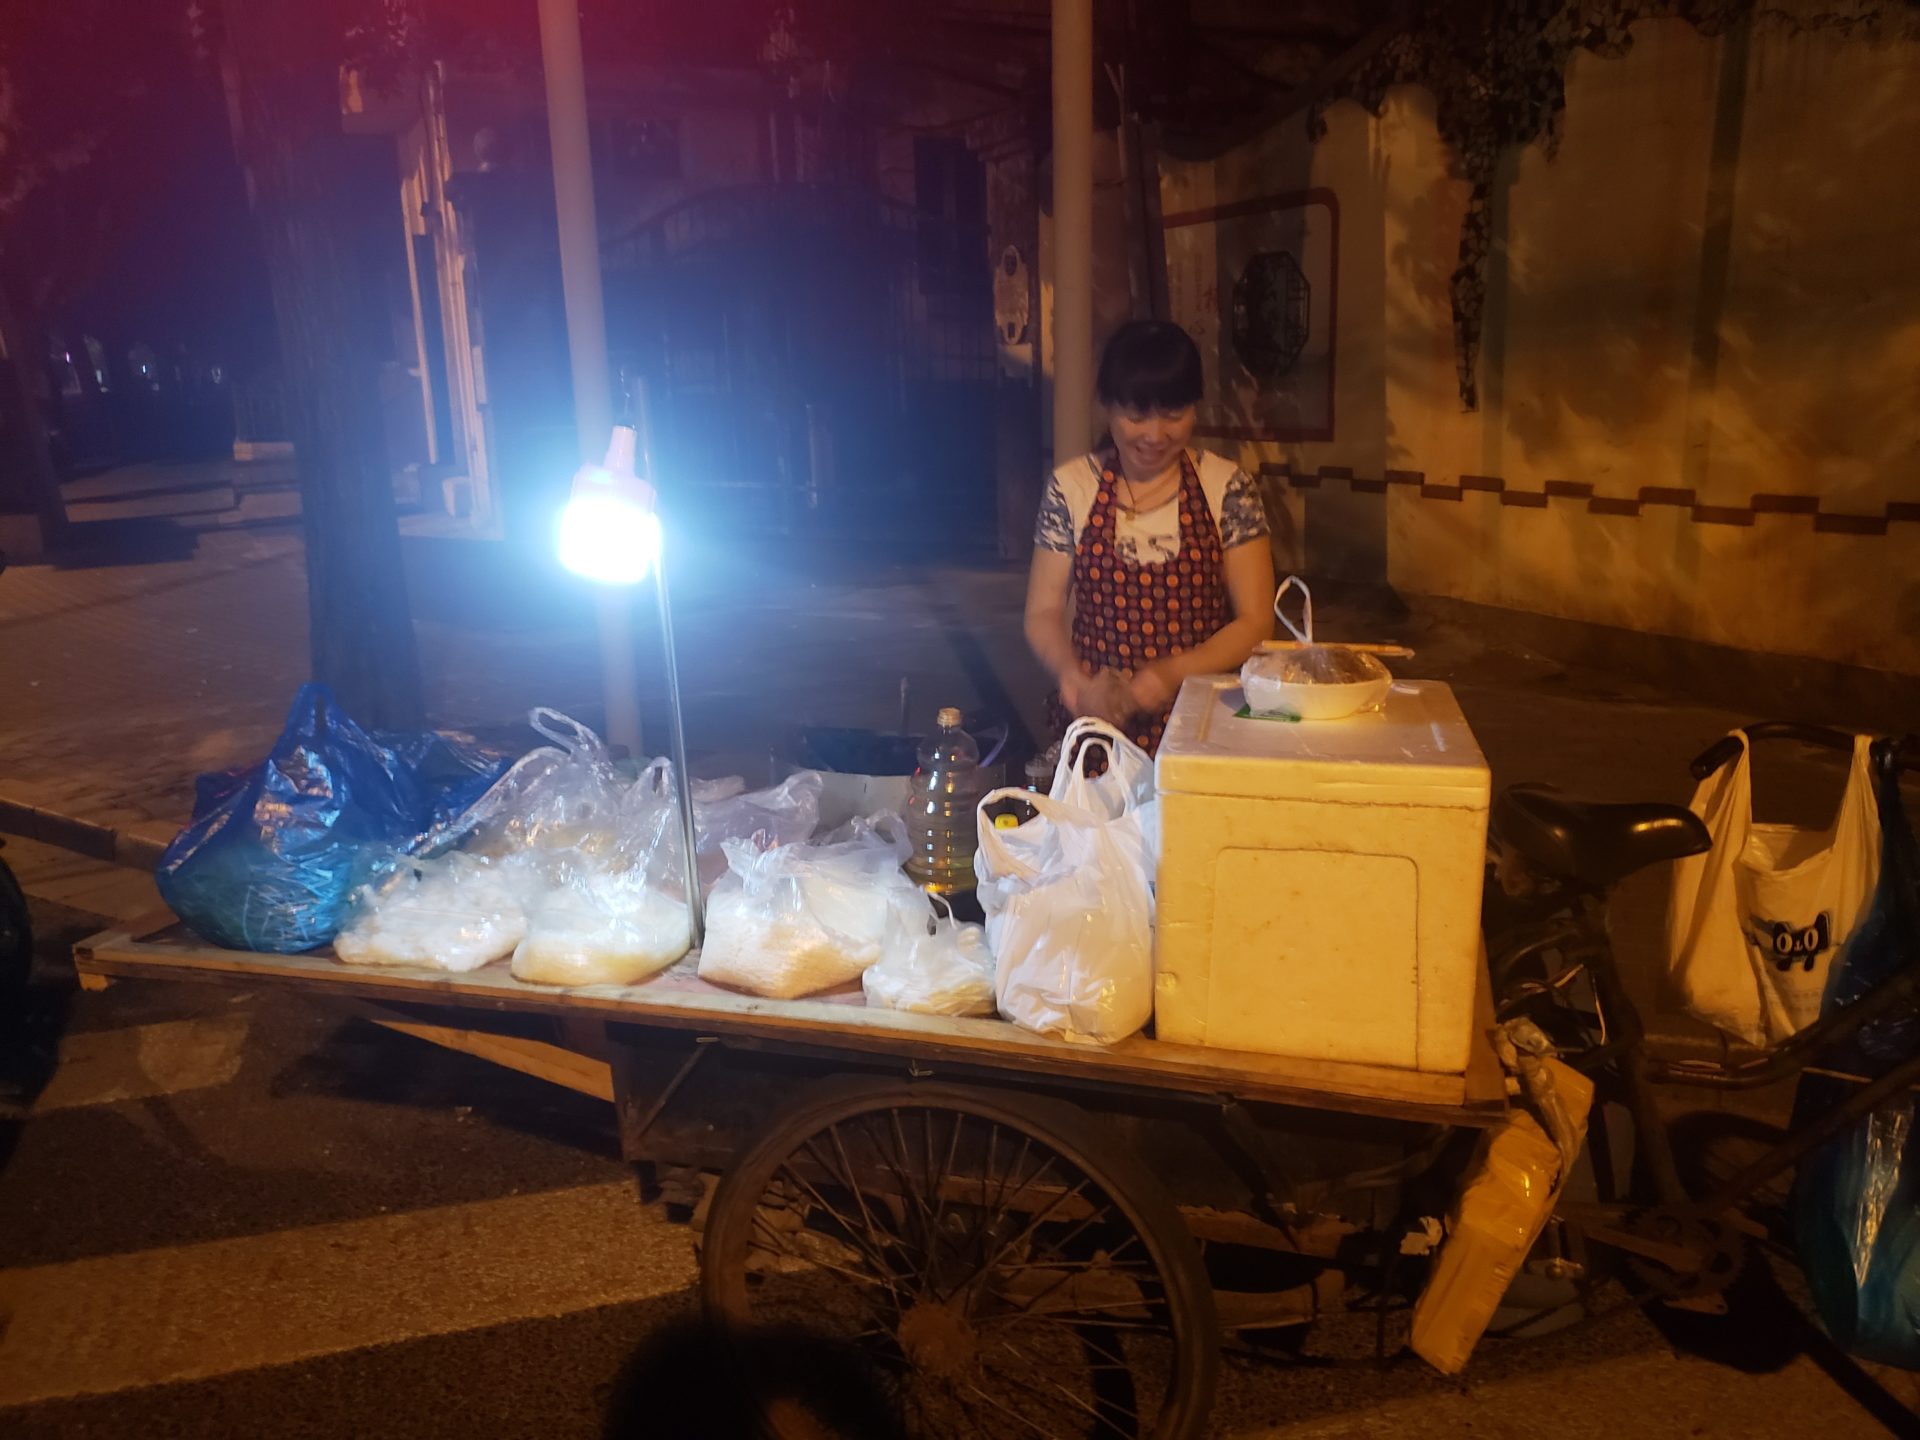 a woman standing next to a cart with bags of food on it